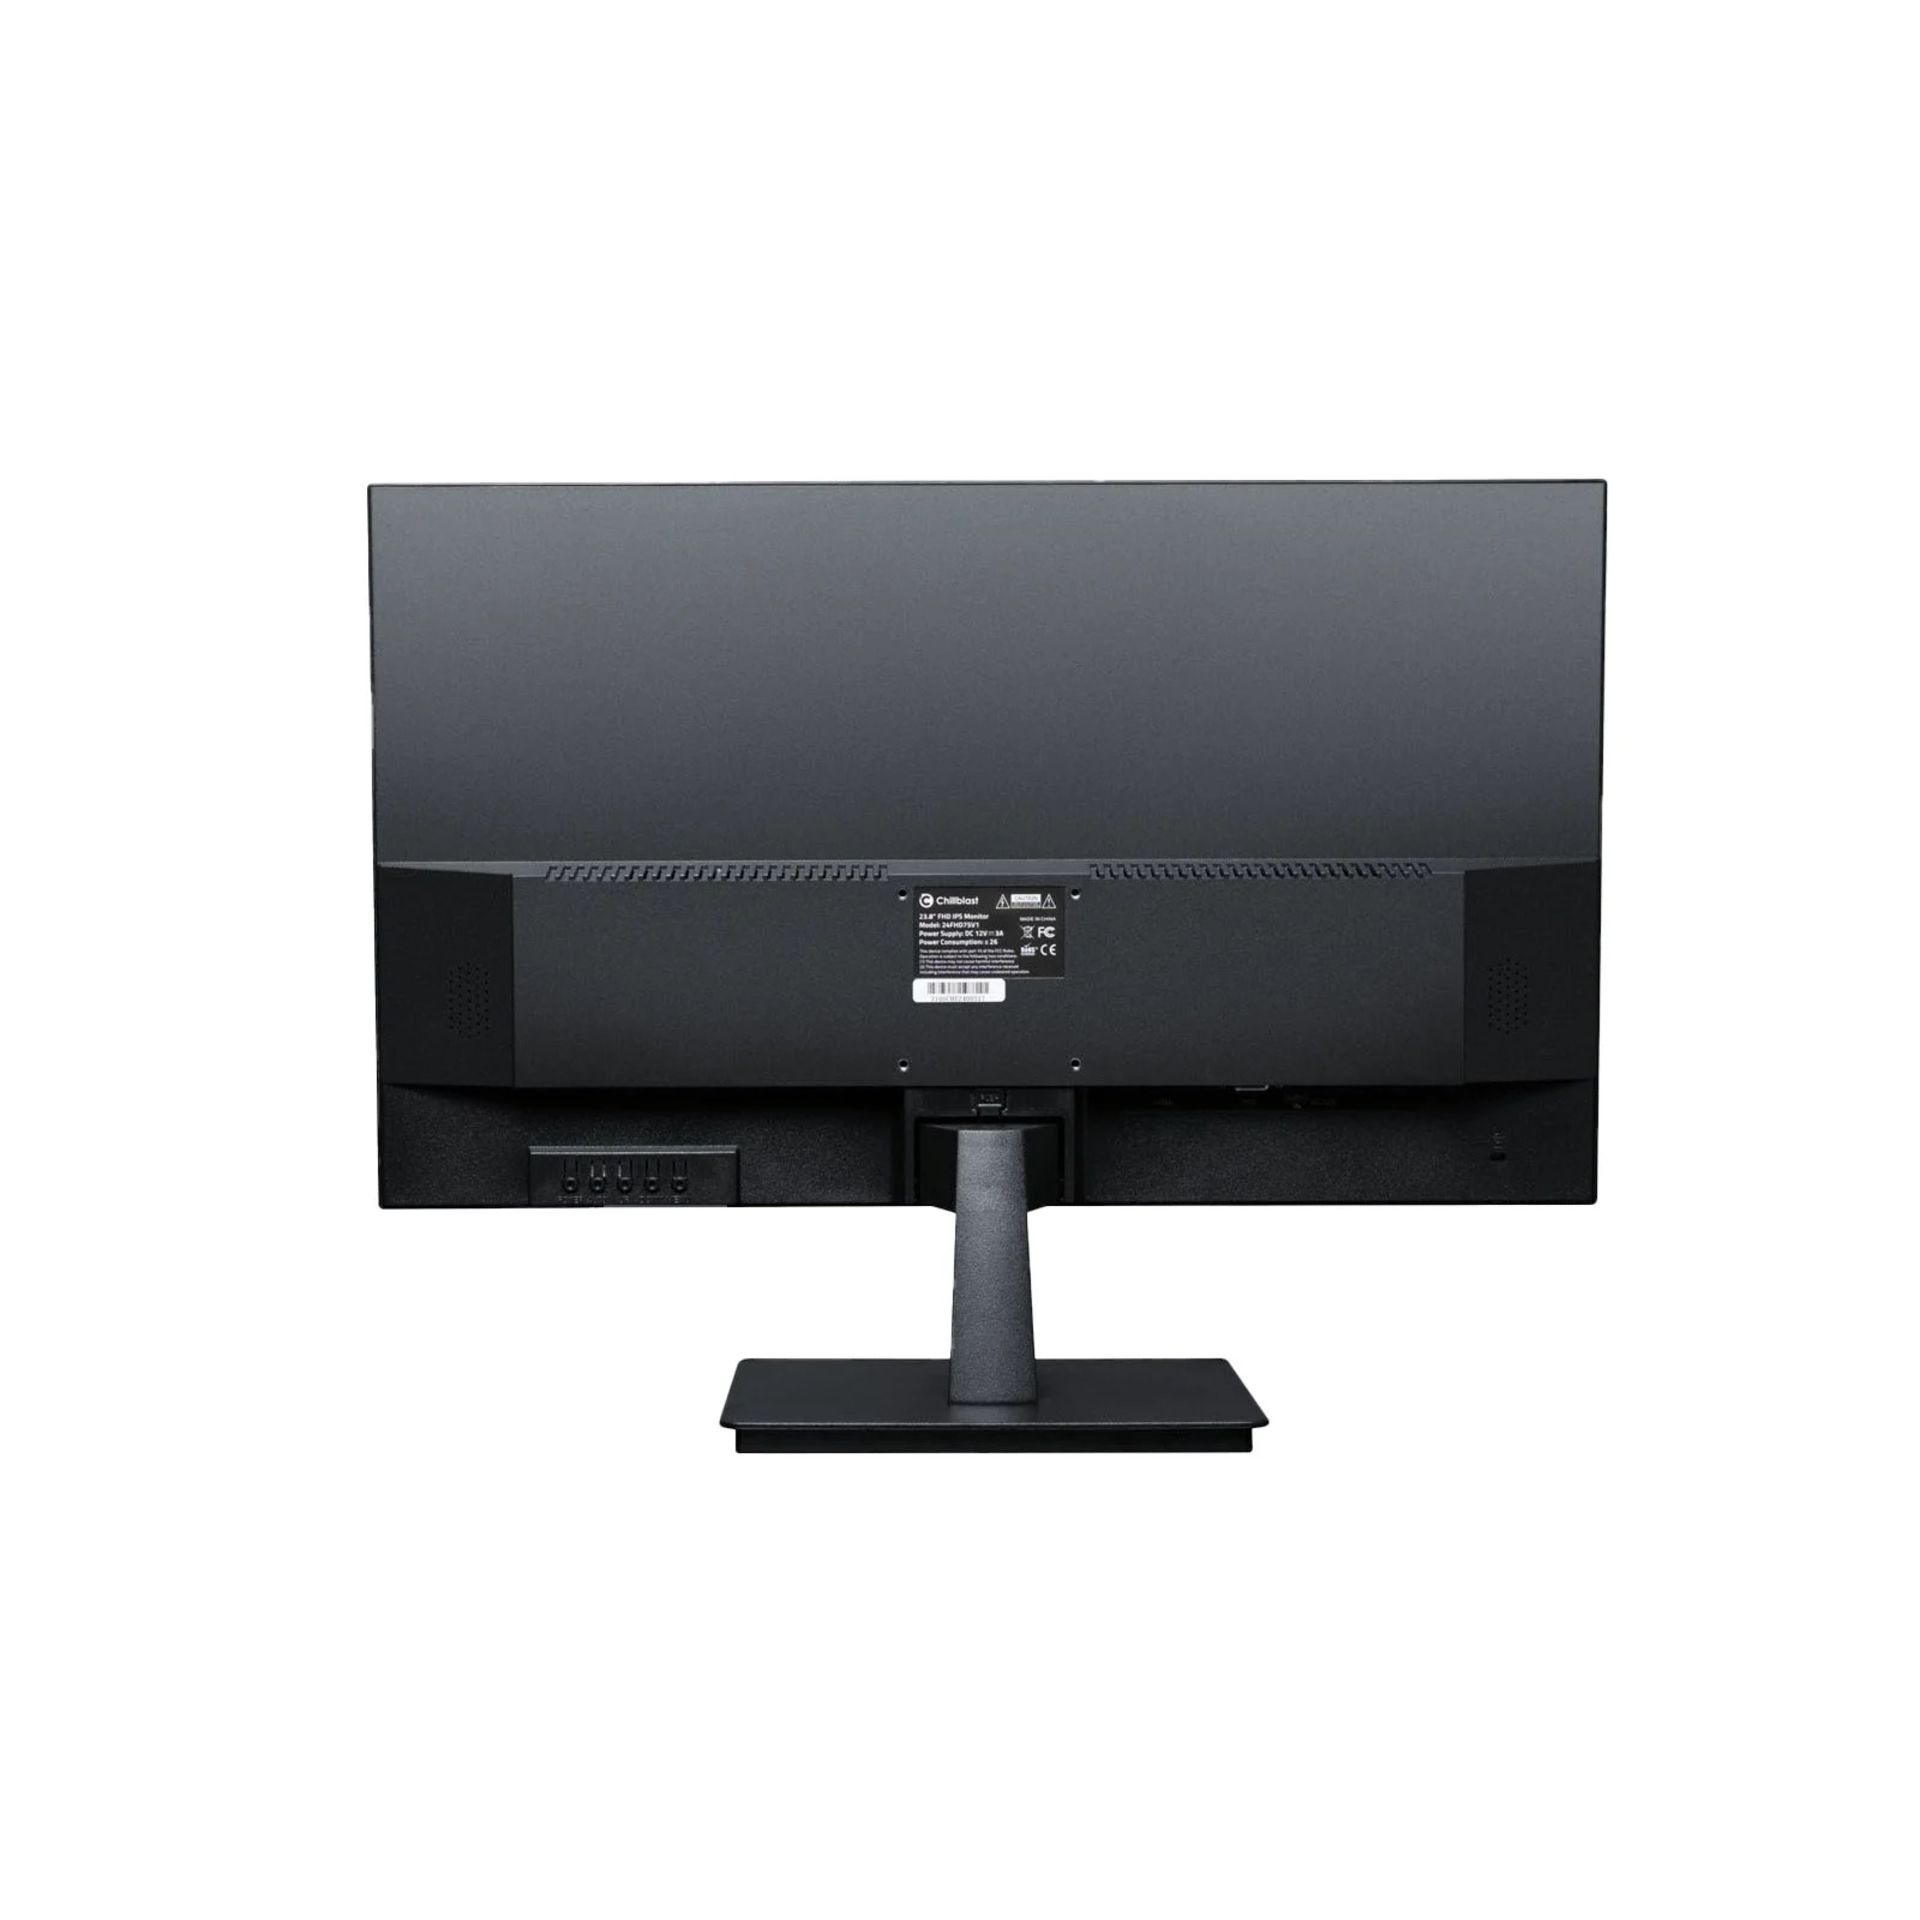 NEW & BOXED CHILLBLAST 24FHD100V1 24 Inch Full HD Gaming Monitor. RRP £129. (PCKBW). For gamers to - Bild 2 aus 2